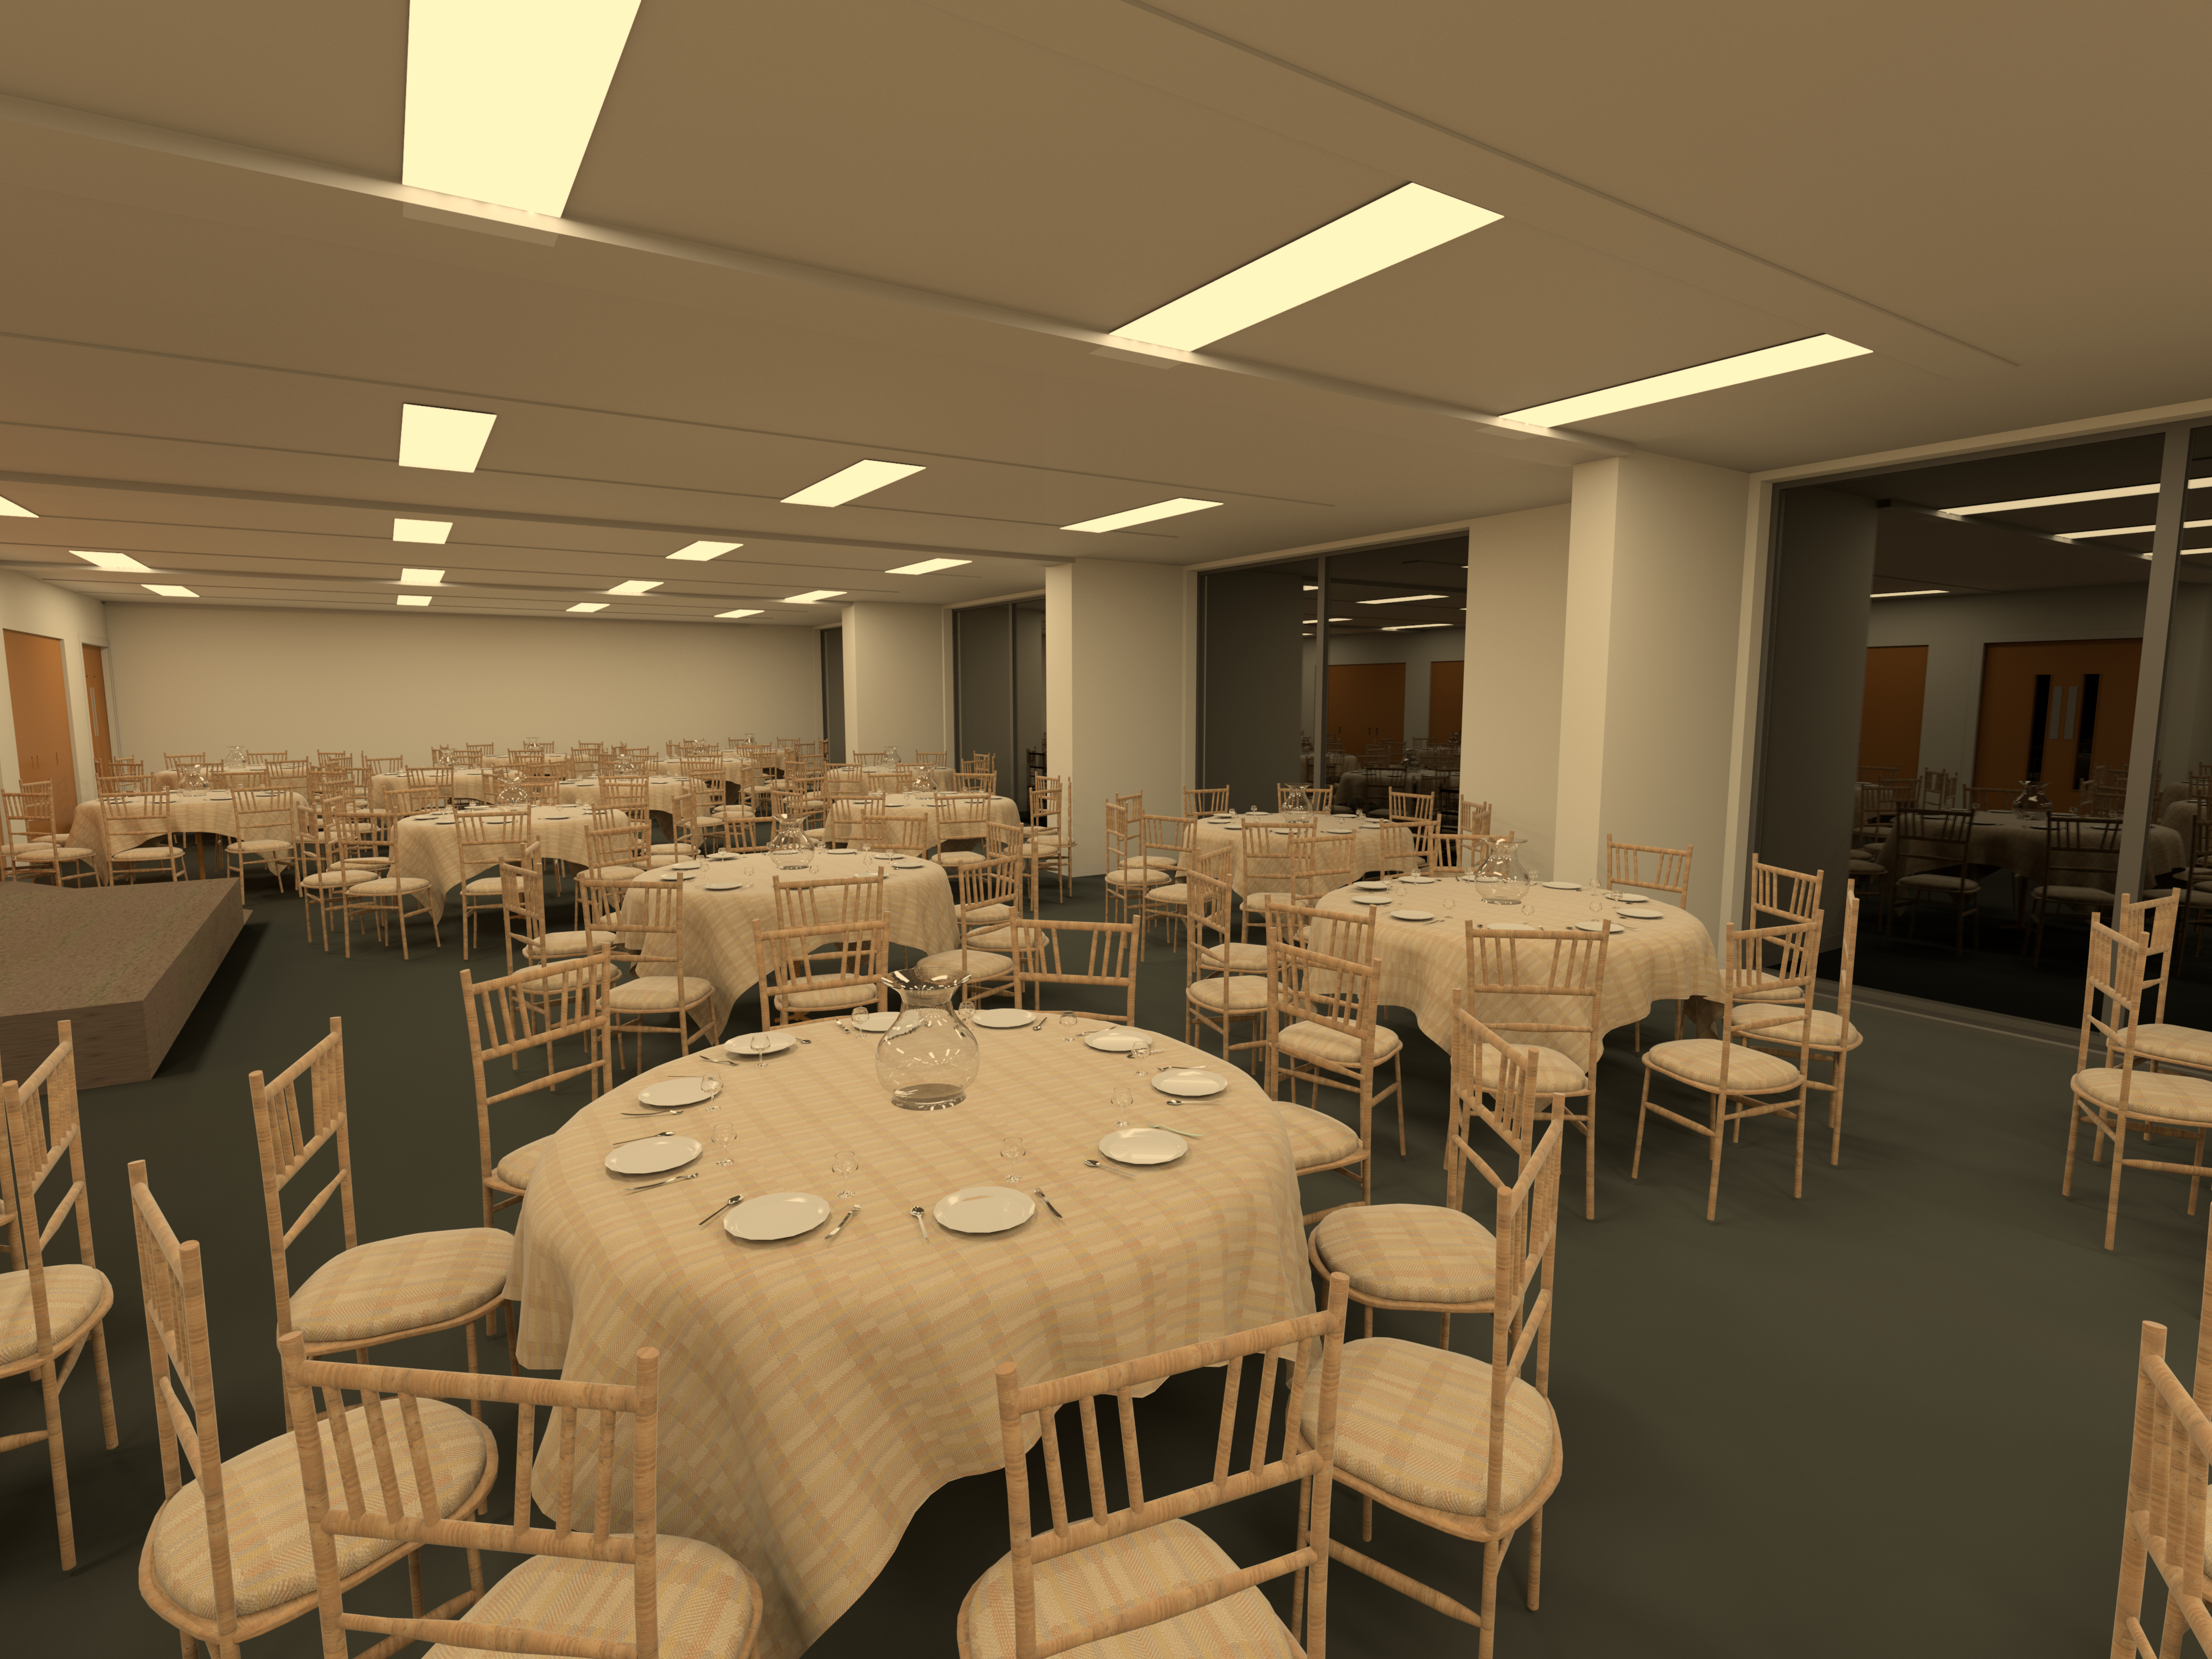 A realistic 3D render showing a round table dinner party.